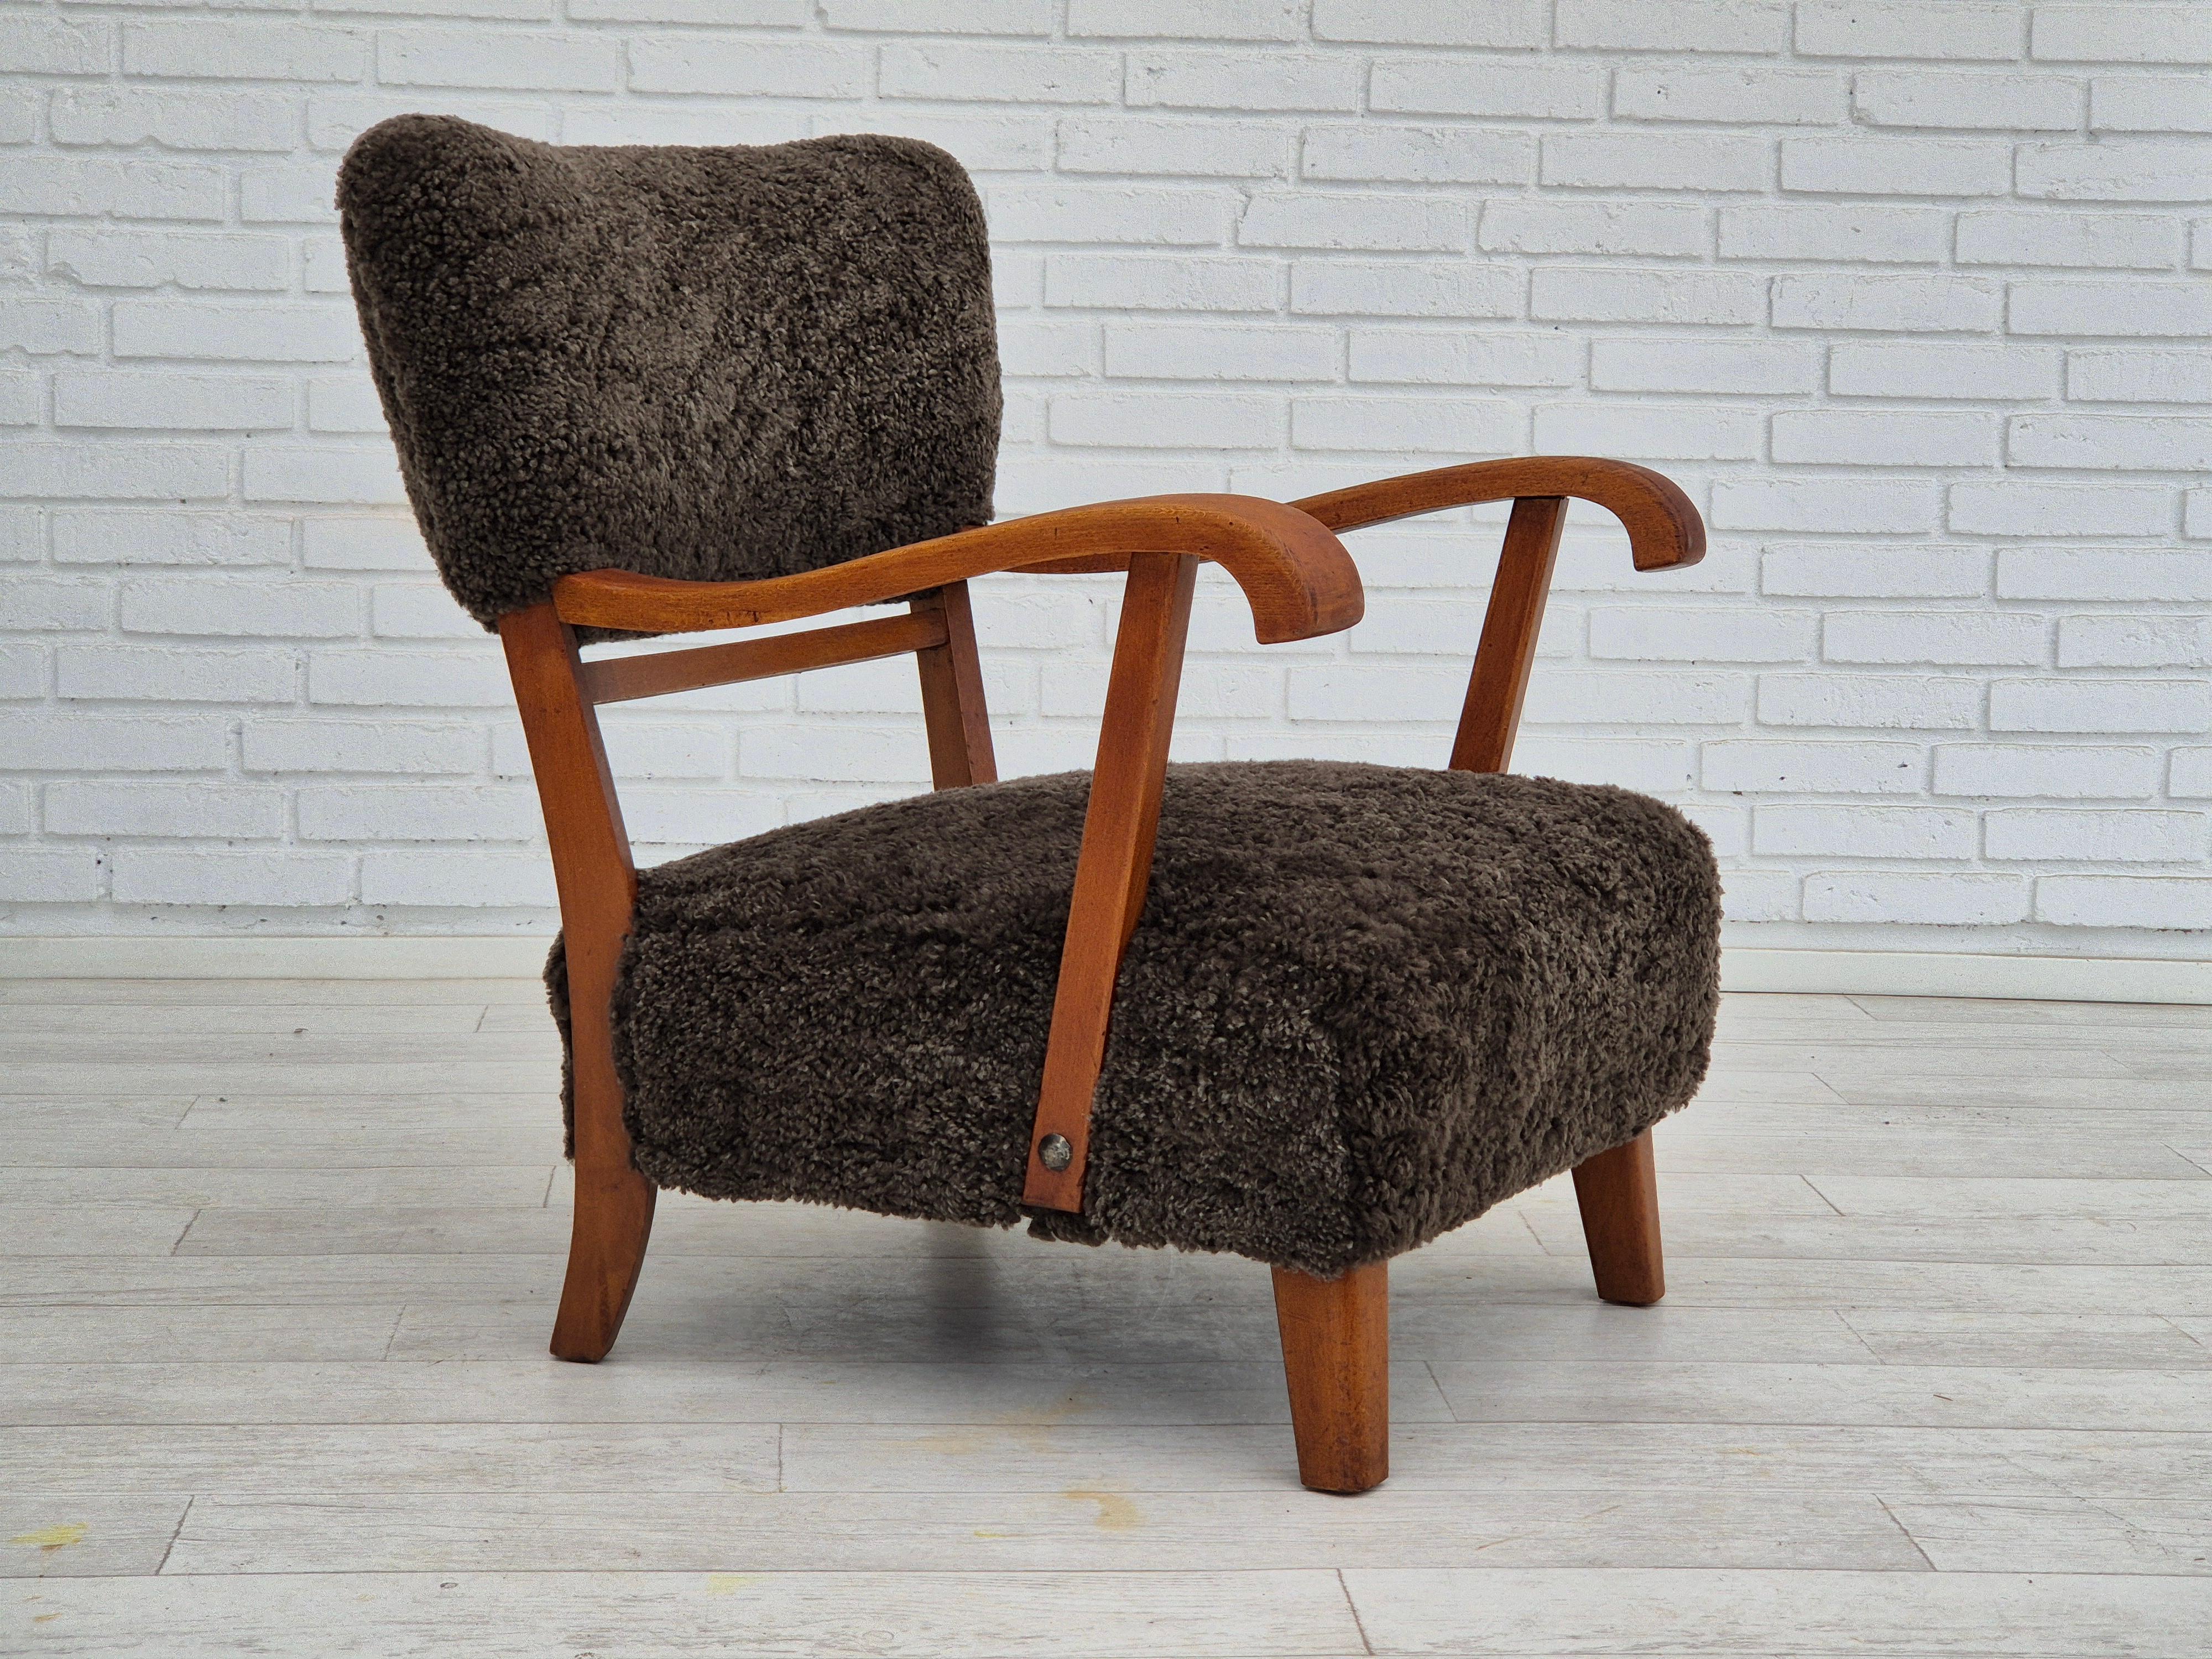 1950s, Danish design. Completely refurbished-reupholstered armchair in quality Nevotex natural New Zealand sheepskin 